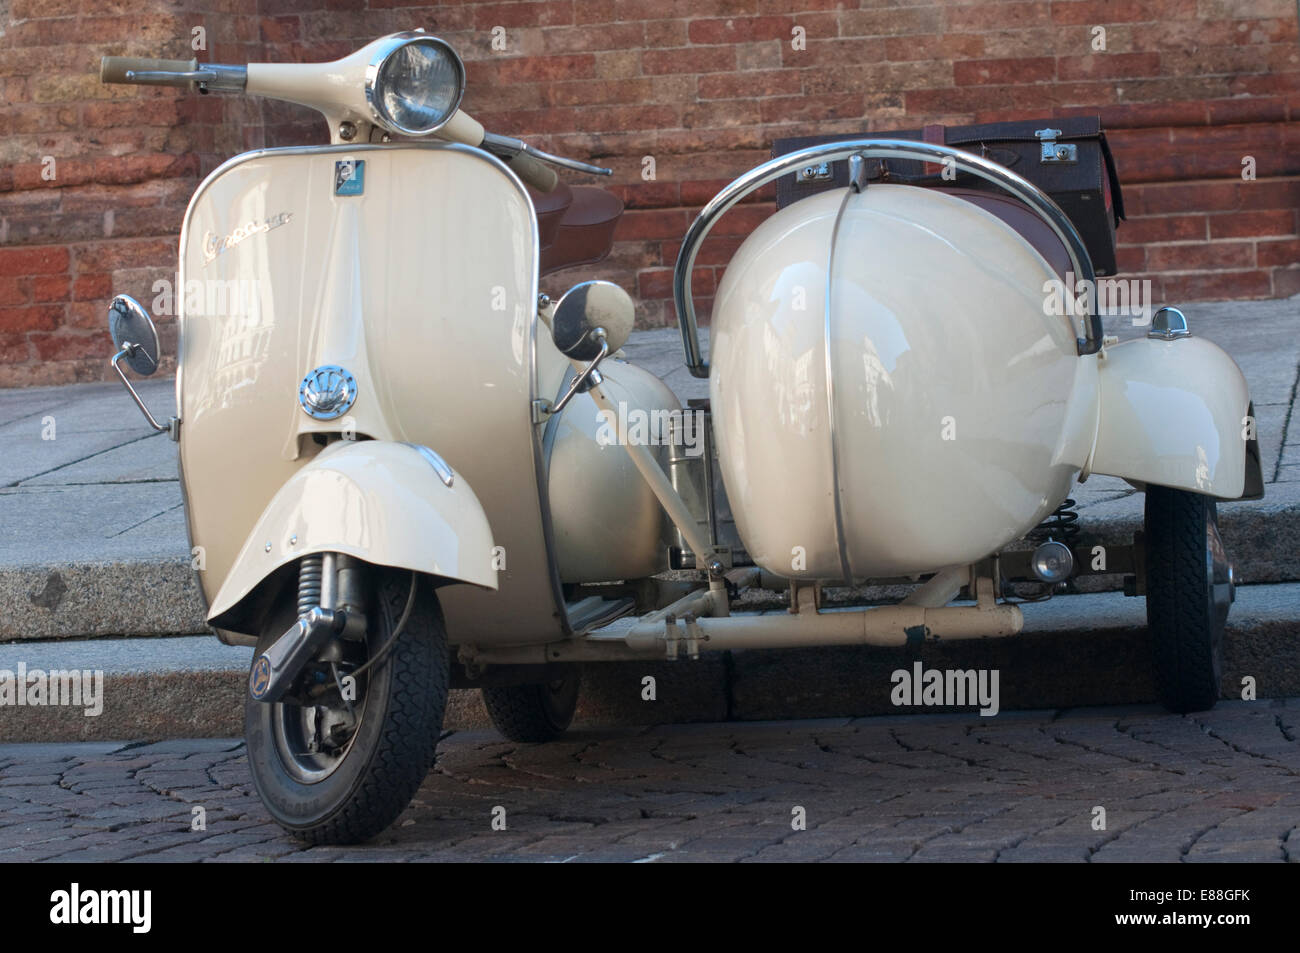 Italy, Lombardy, Crema,  Meeting of Scooter Vespa, Sidecar Stock Photo